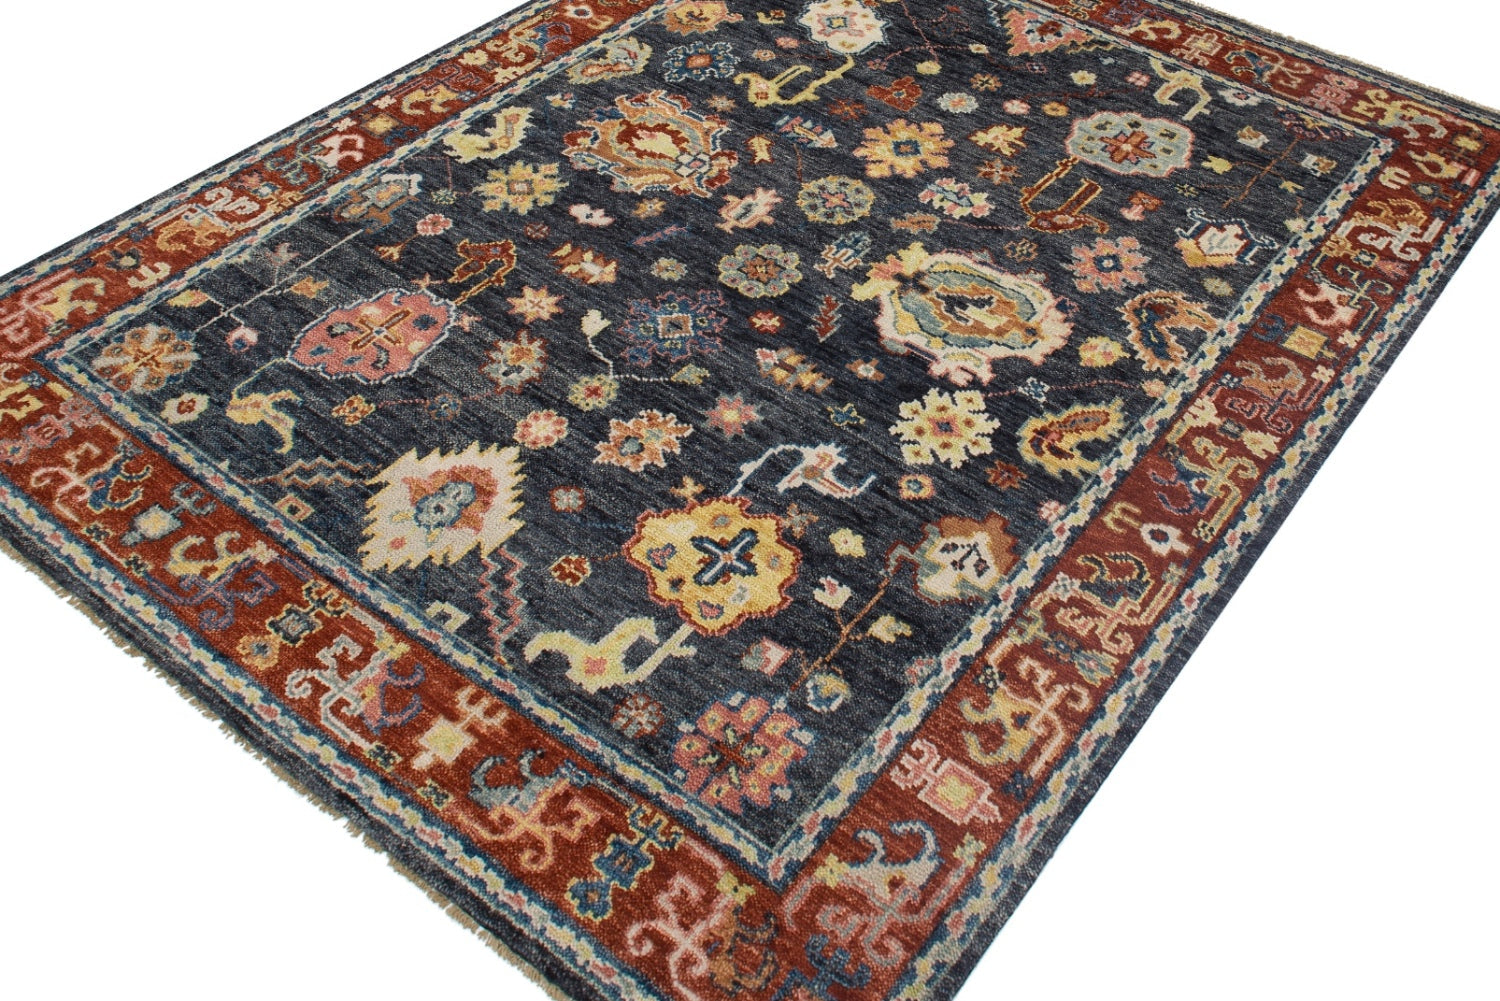 Sultanabad 4 Handwoven Traditional Rug, J71736